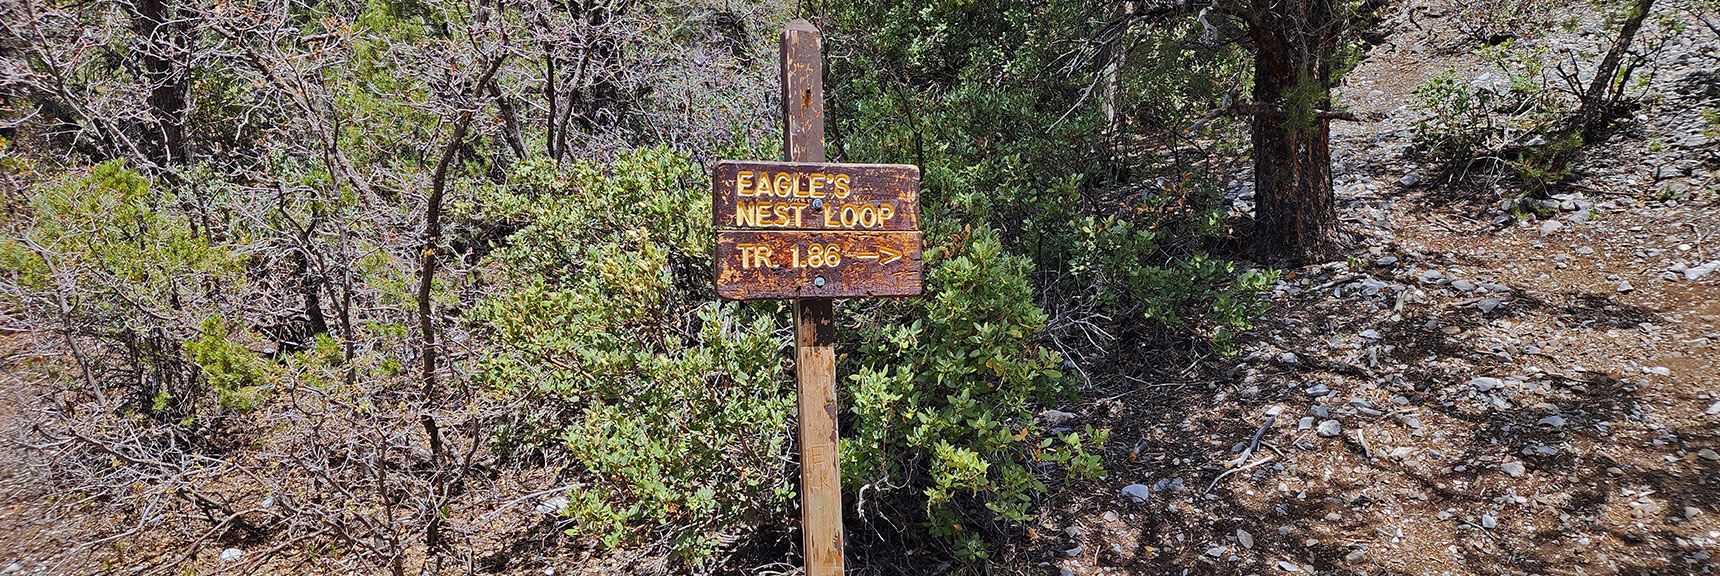 Right Turn for Eagle's Nest Loop, Left Turn for Fletcher Canyon | Fletcher Canyon Trail | Mt Charleston Wilderness | Spring Mountains, Nevada